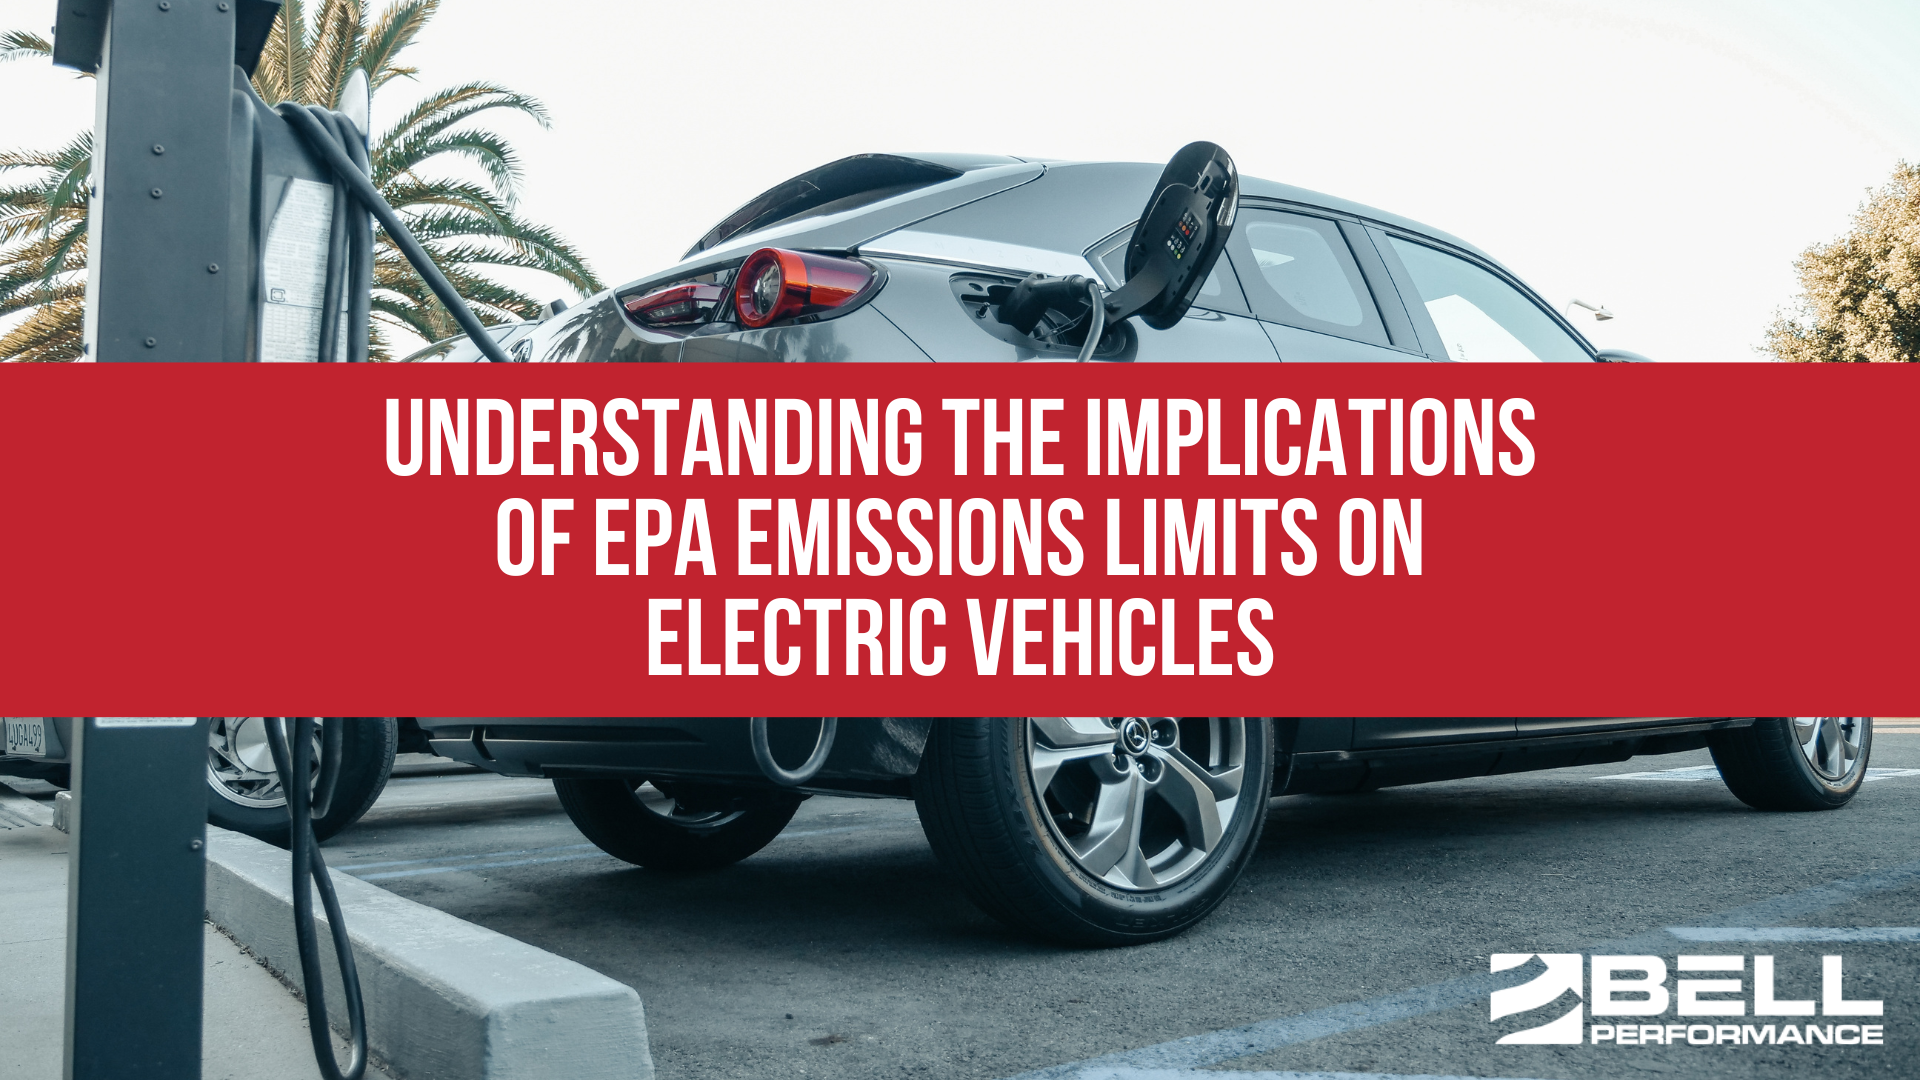 Understanding the Implications of EPA Emissions Limits on Electric Vehicles